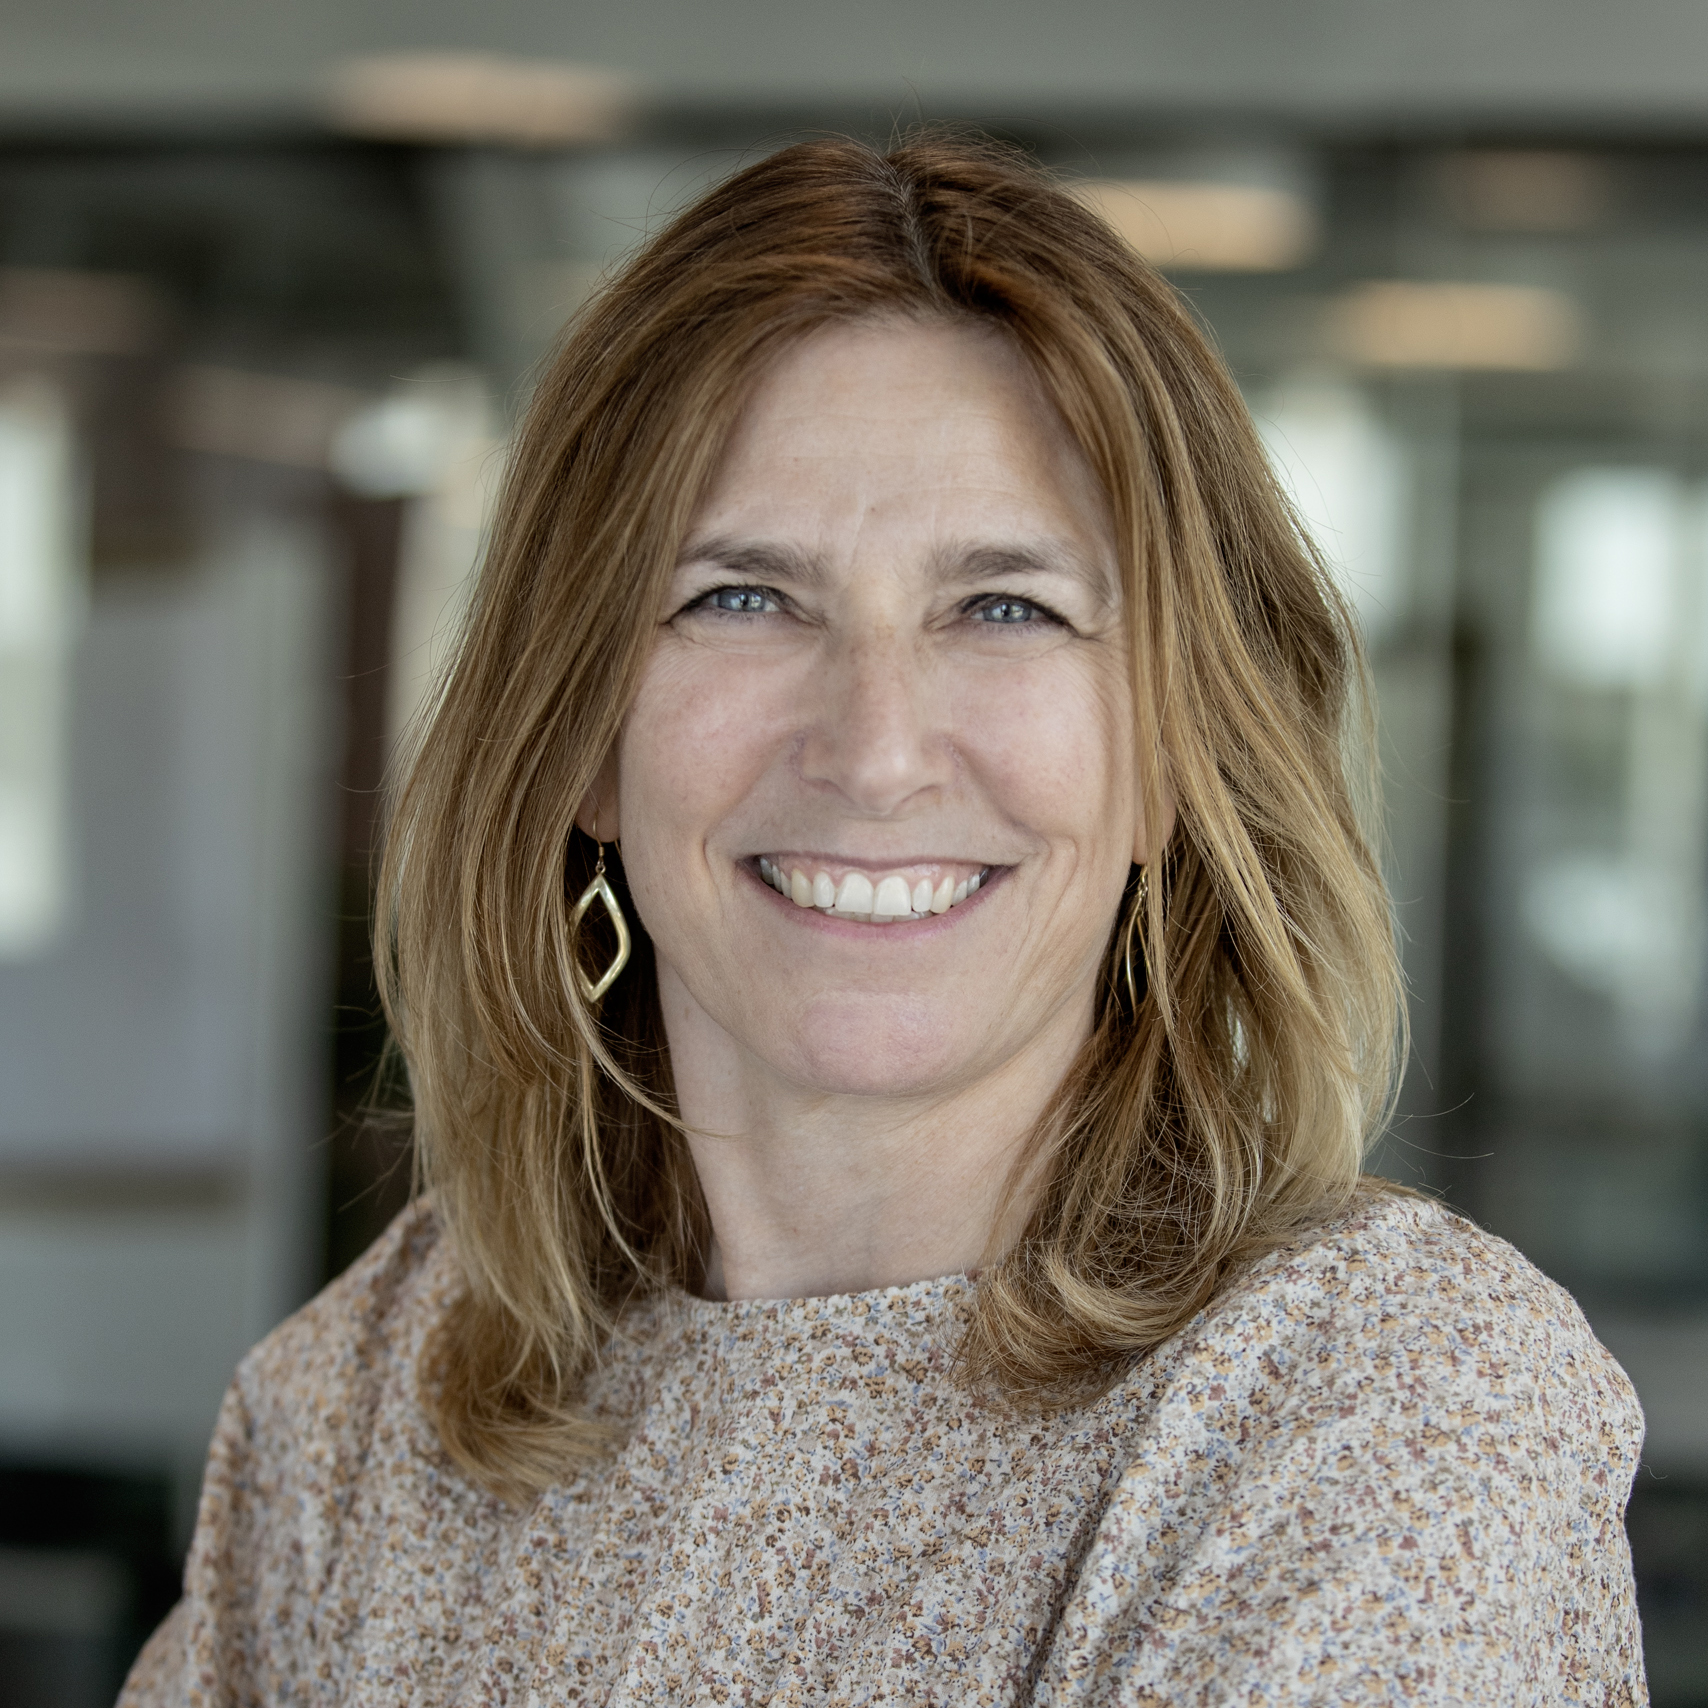 Trine Baun to drive technology and business in the financial services sector in the Nordics